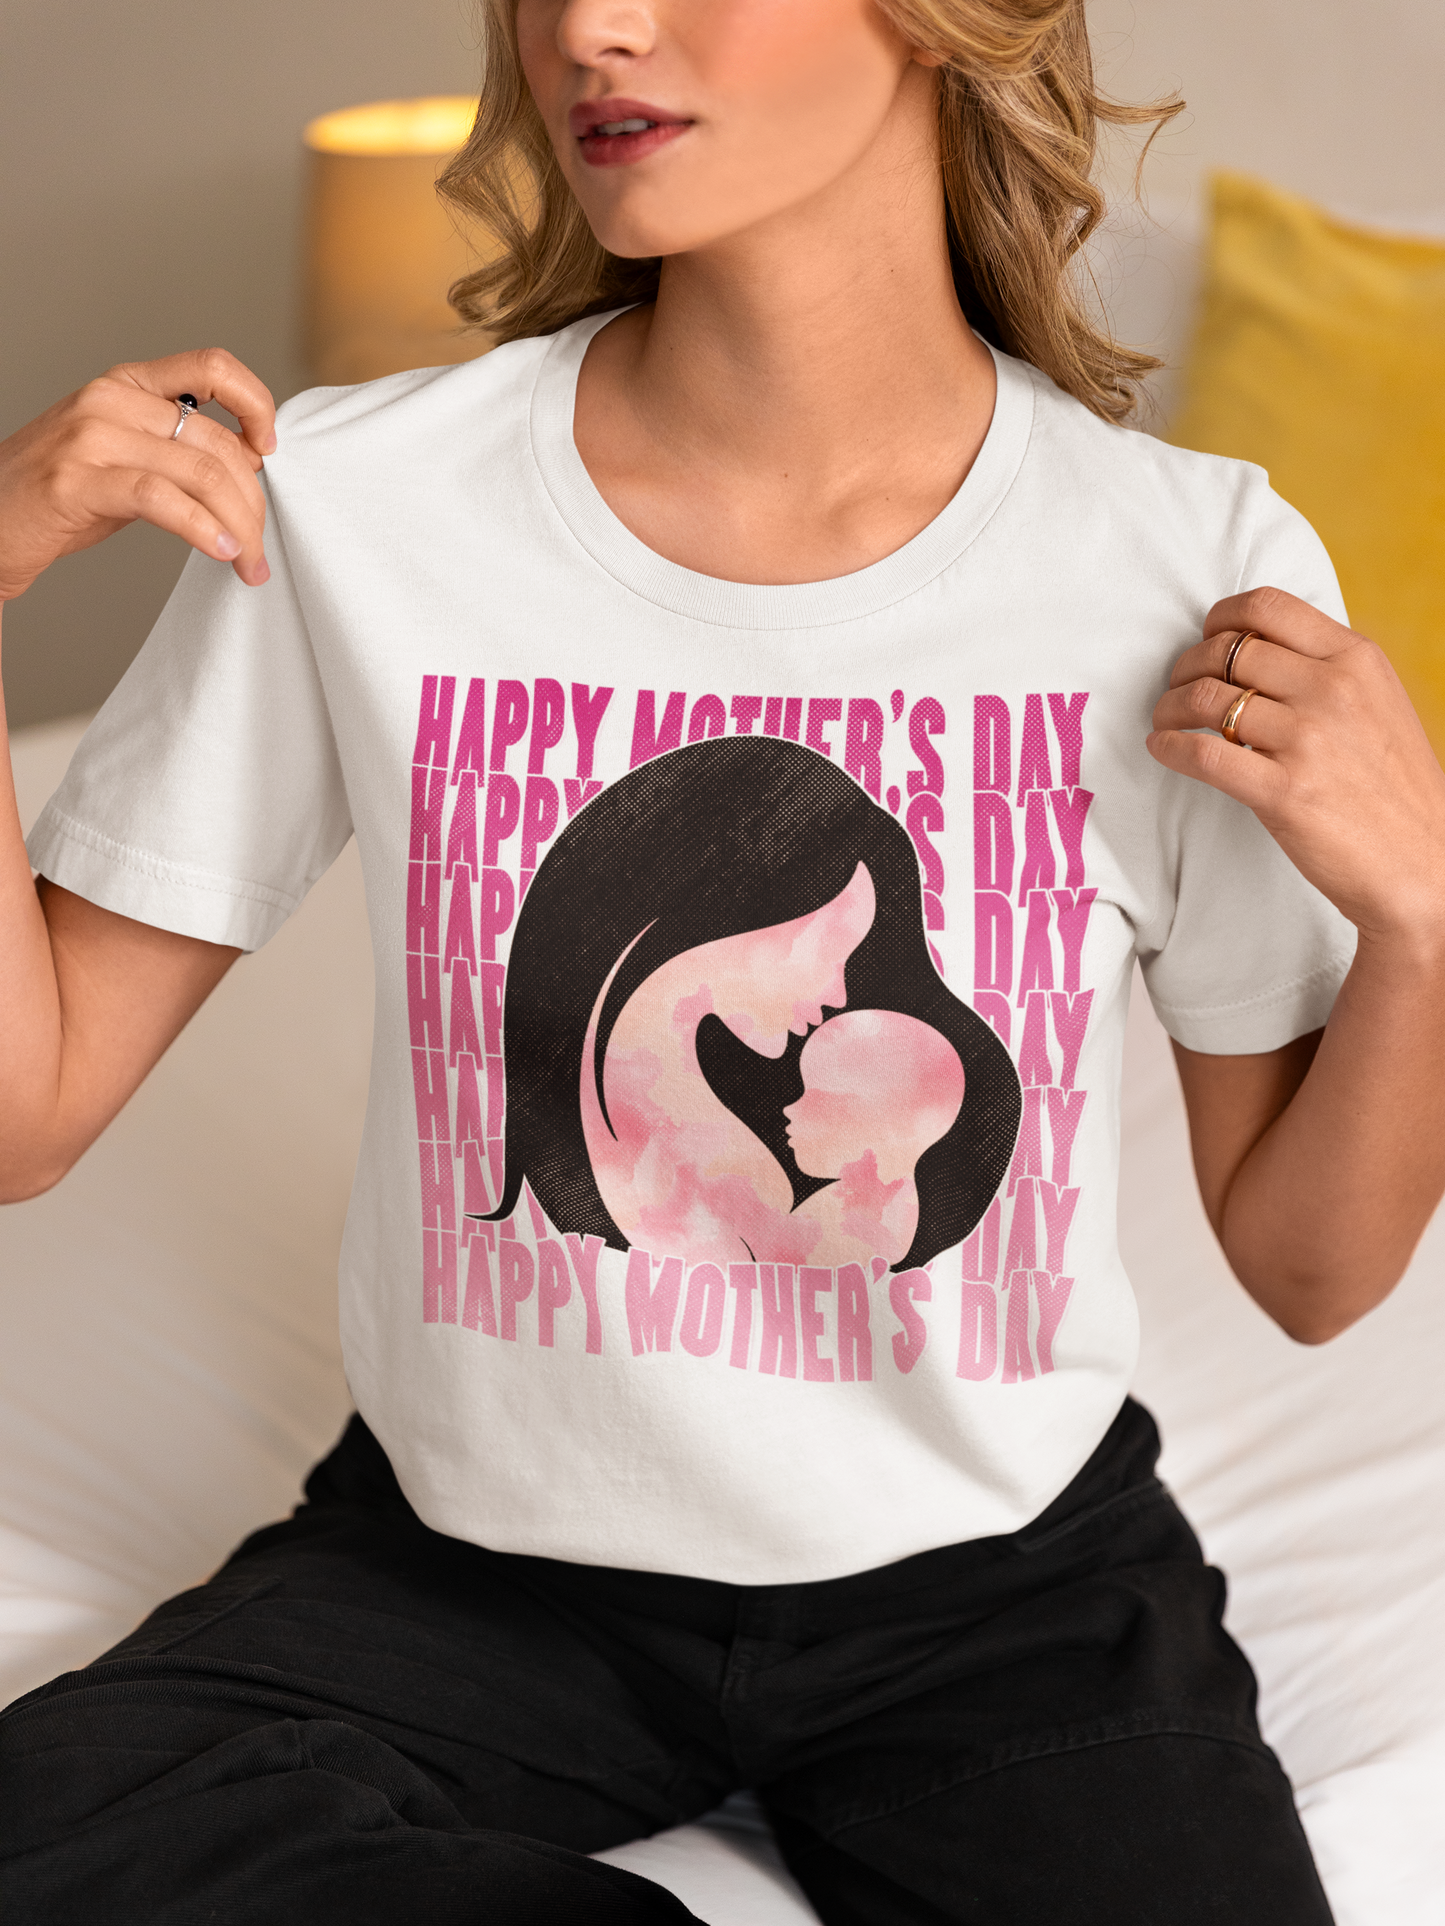 Happy Mother's Day Shirt,  Mother And New Born Line Art, Minimalist Single Line Art Drawing, Watercolor Mother's Day Heart Shirt, Customized Mother's Day Shirt